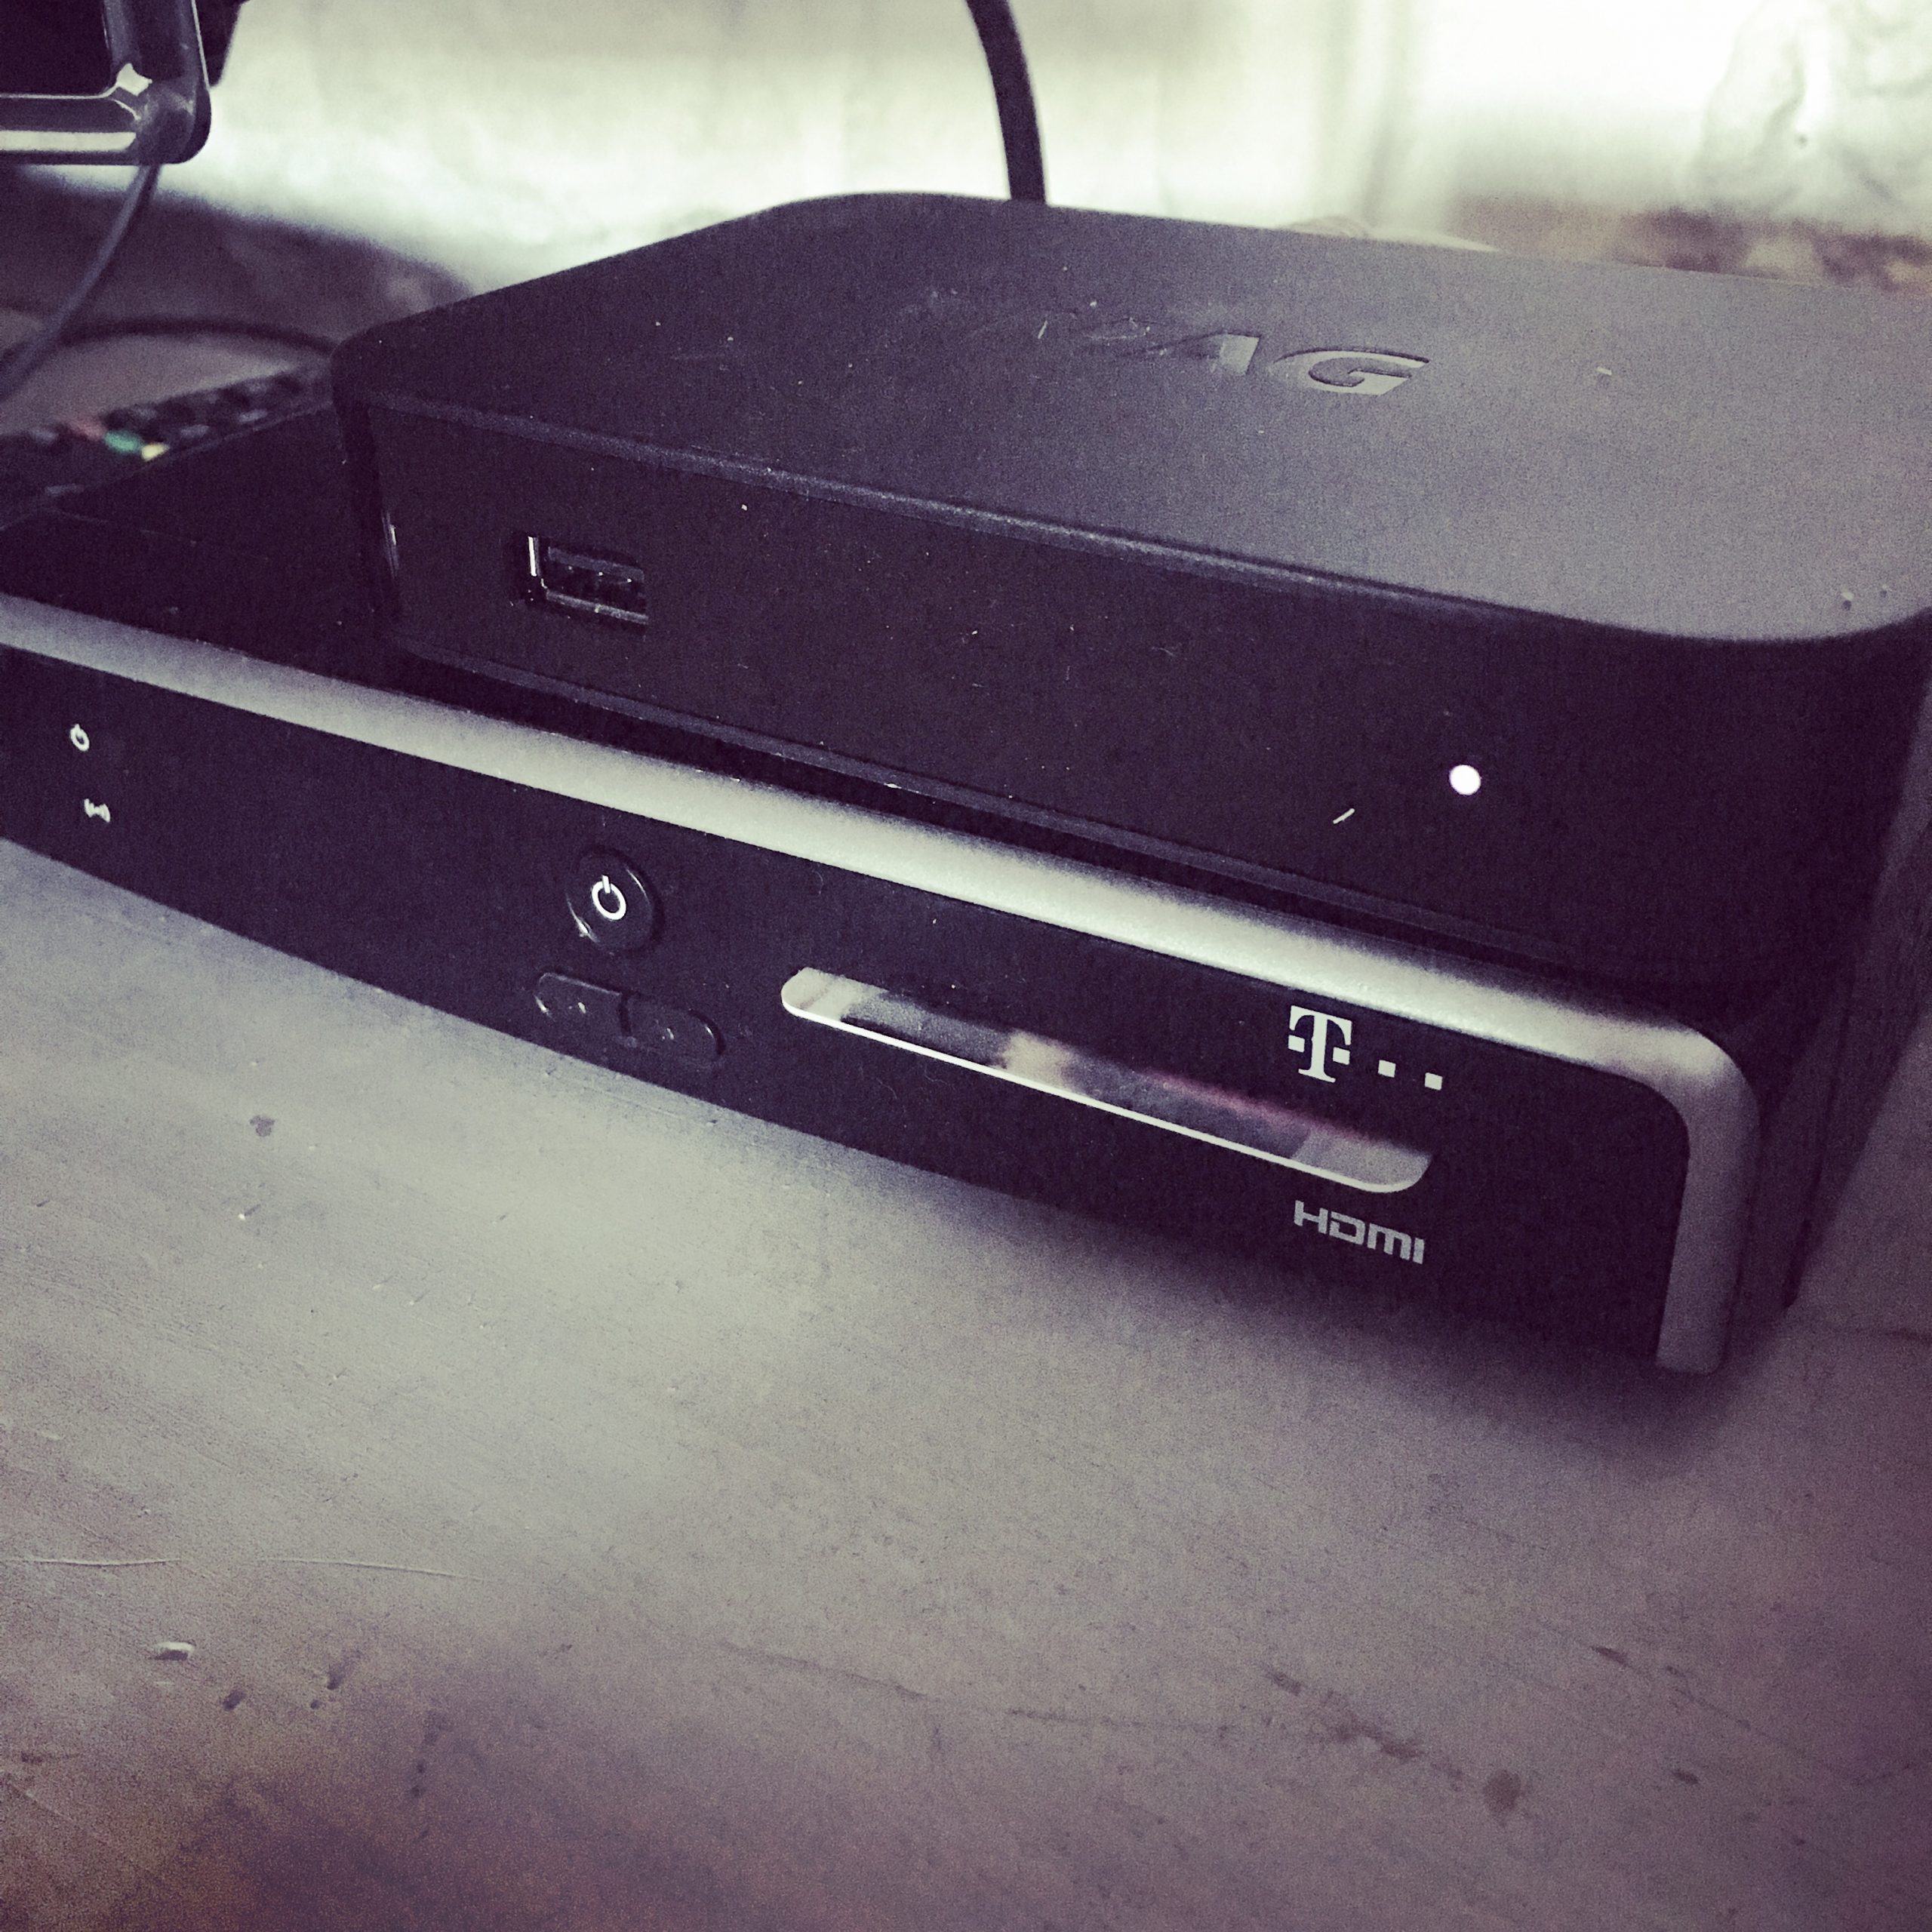 New set top box – and four solid lights on our new router. Success all round!